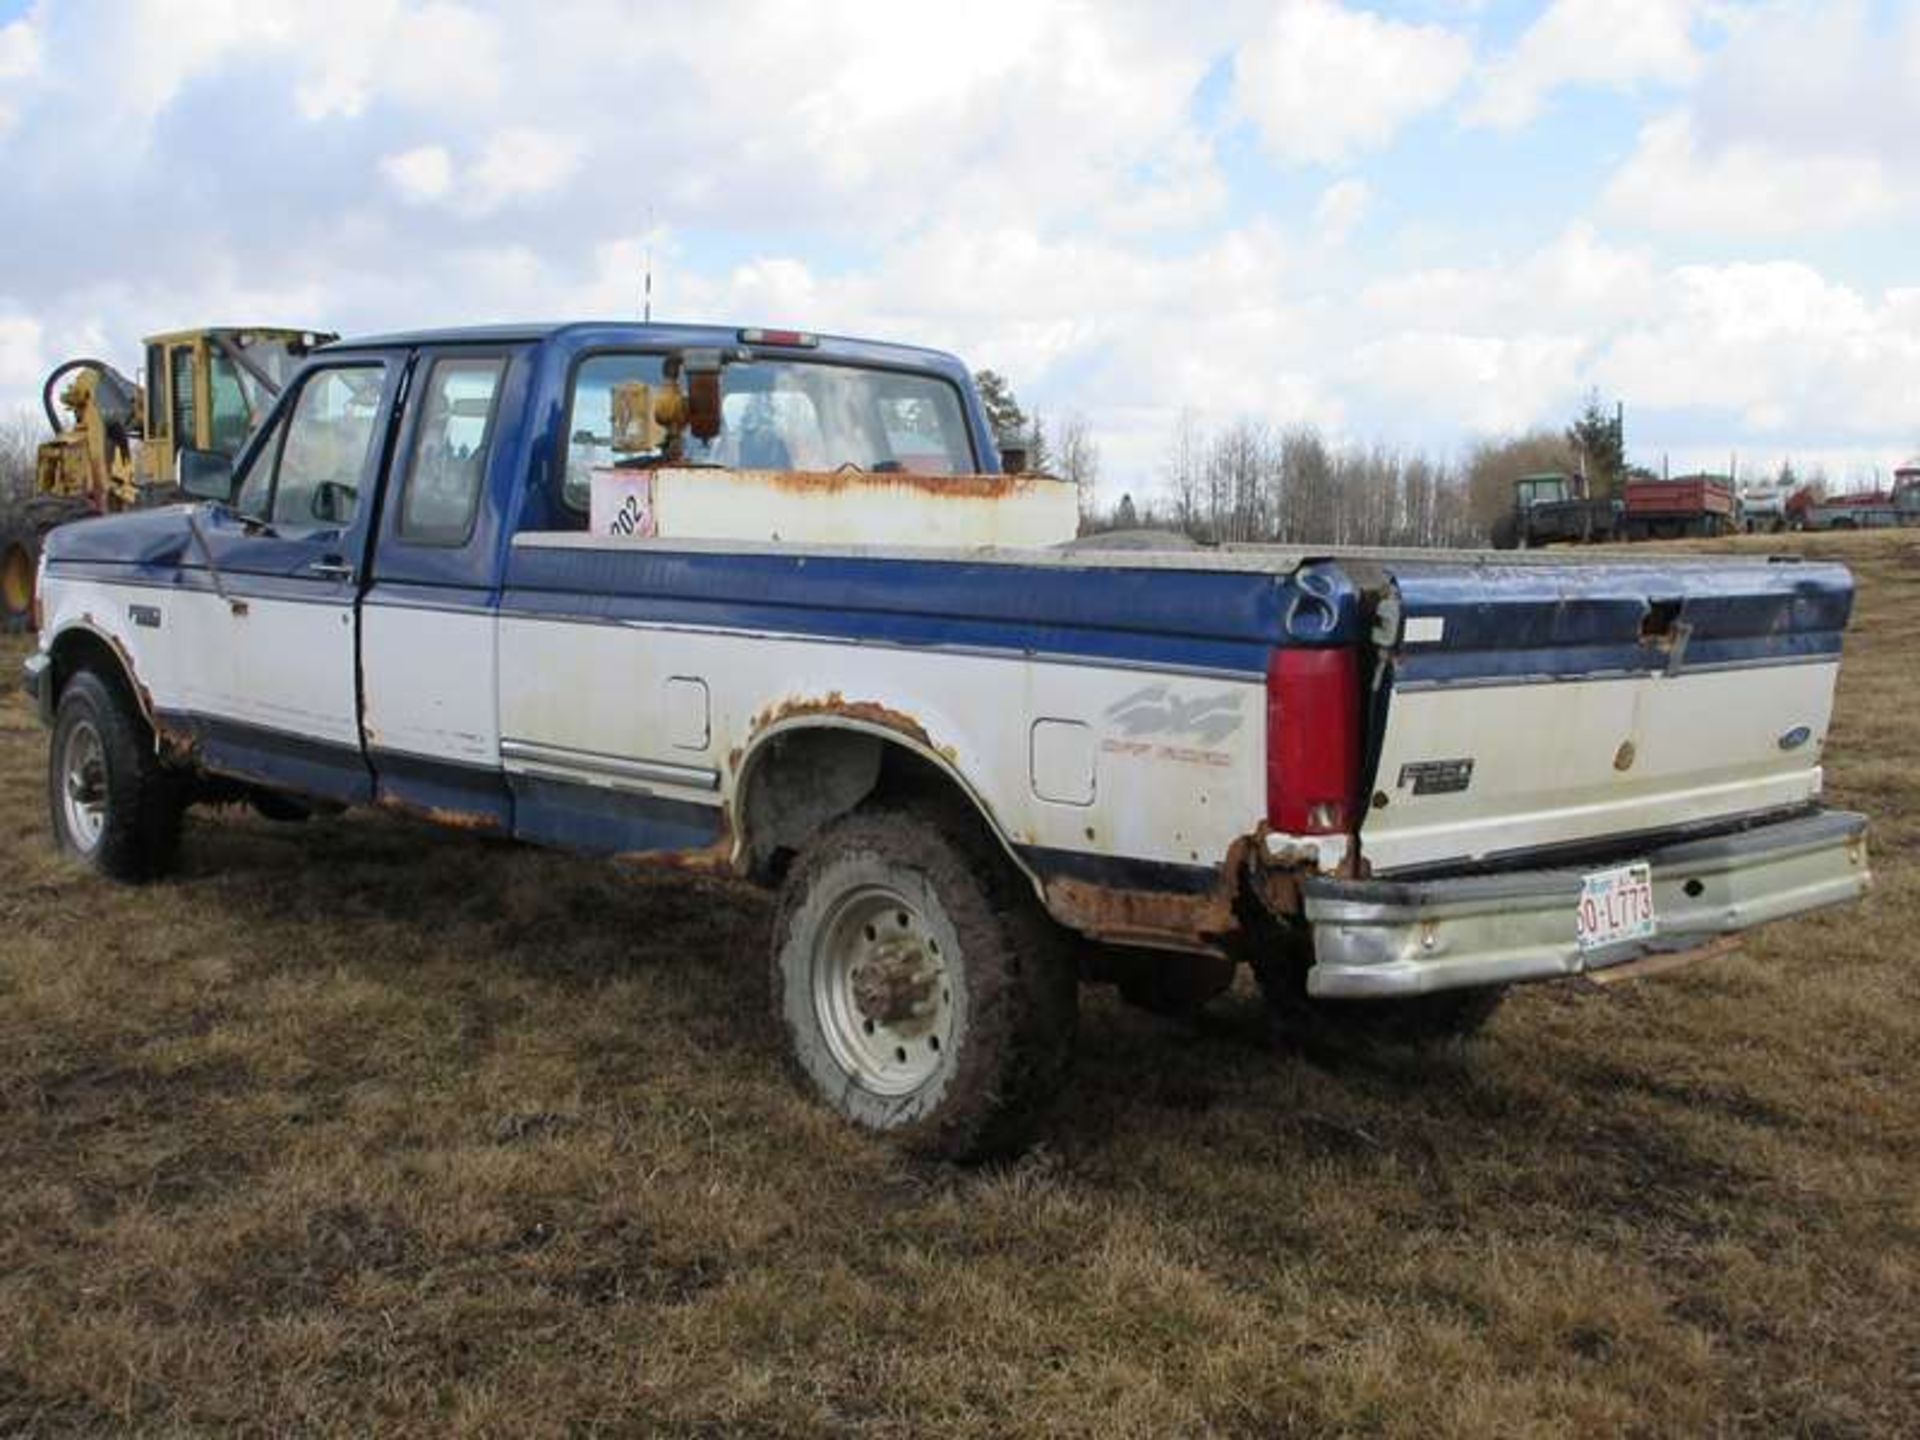 1997 Ford F250 4X4 Supercab Pickup (Parts Truck) - Image 3 of 4